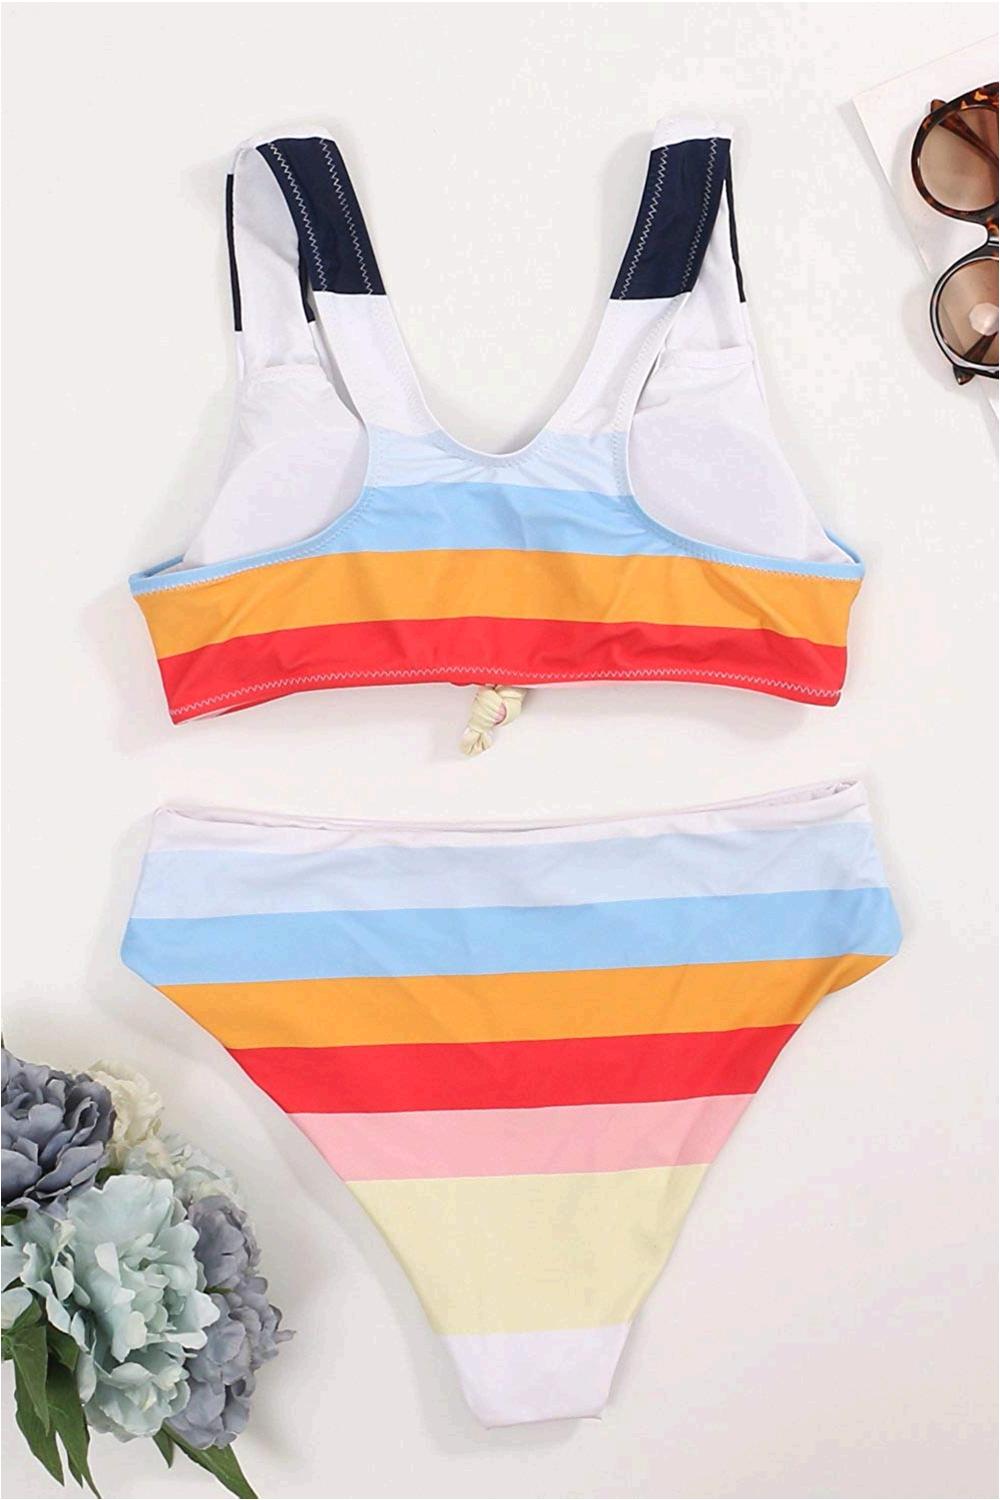 Honlyps Two Piece High Waisted Bathing Suit Striped Bikini Multicolor